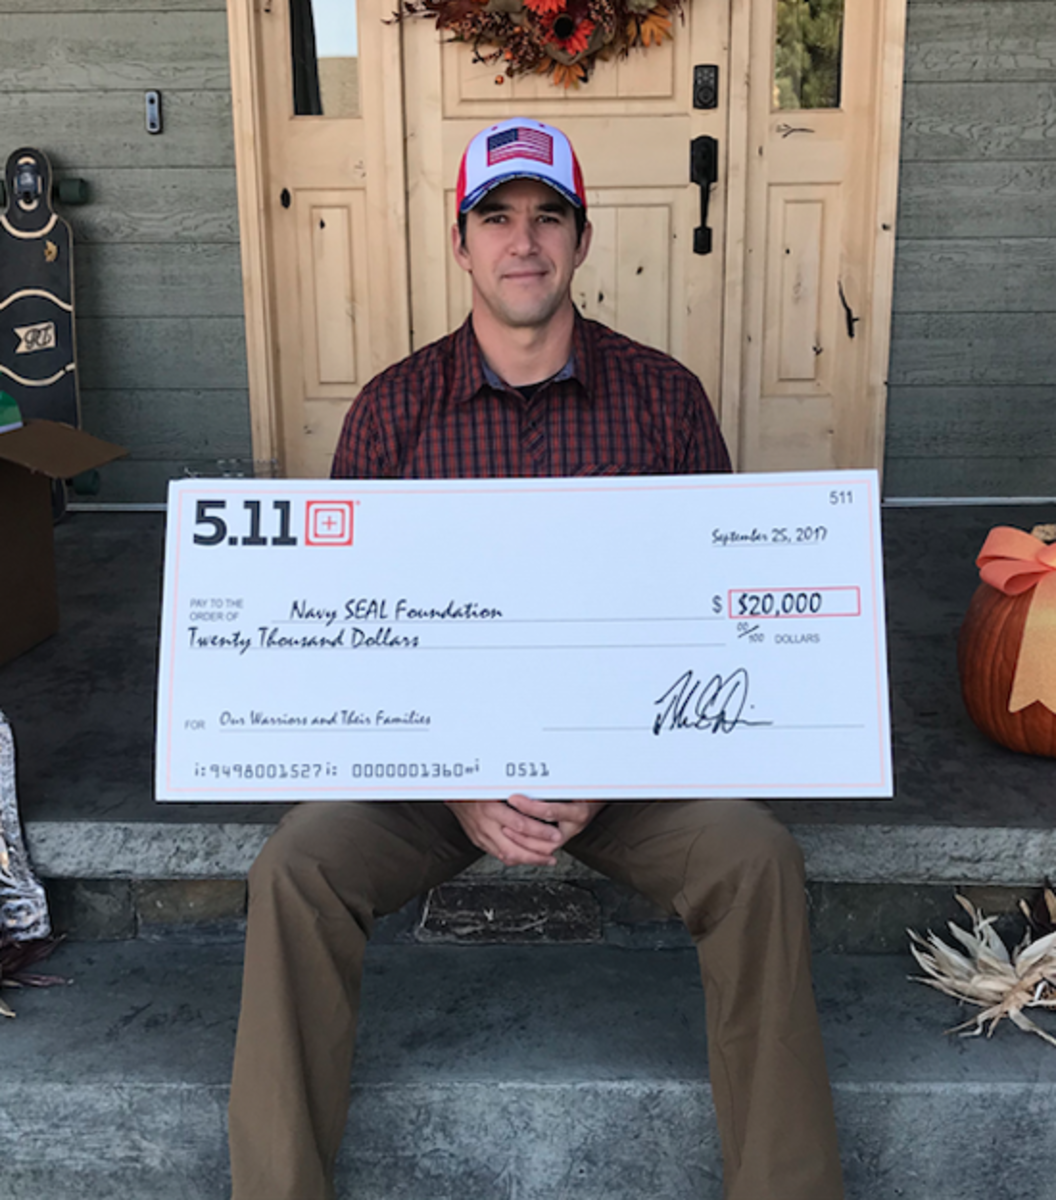  Andy Stumpf holding the $20,000 check from 5.11 to Navy SEAL Foundation